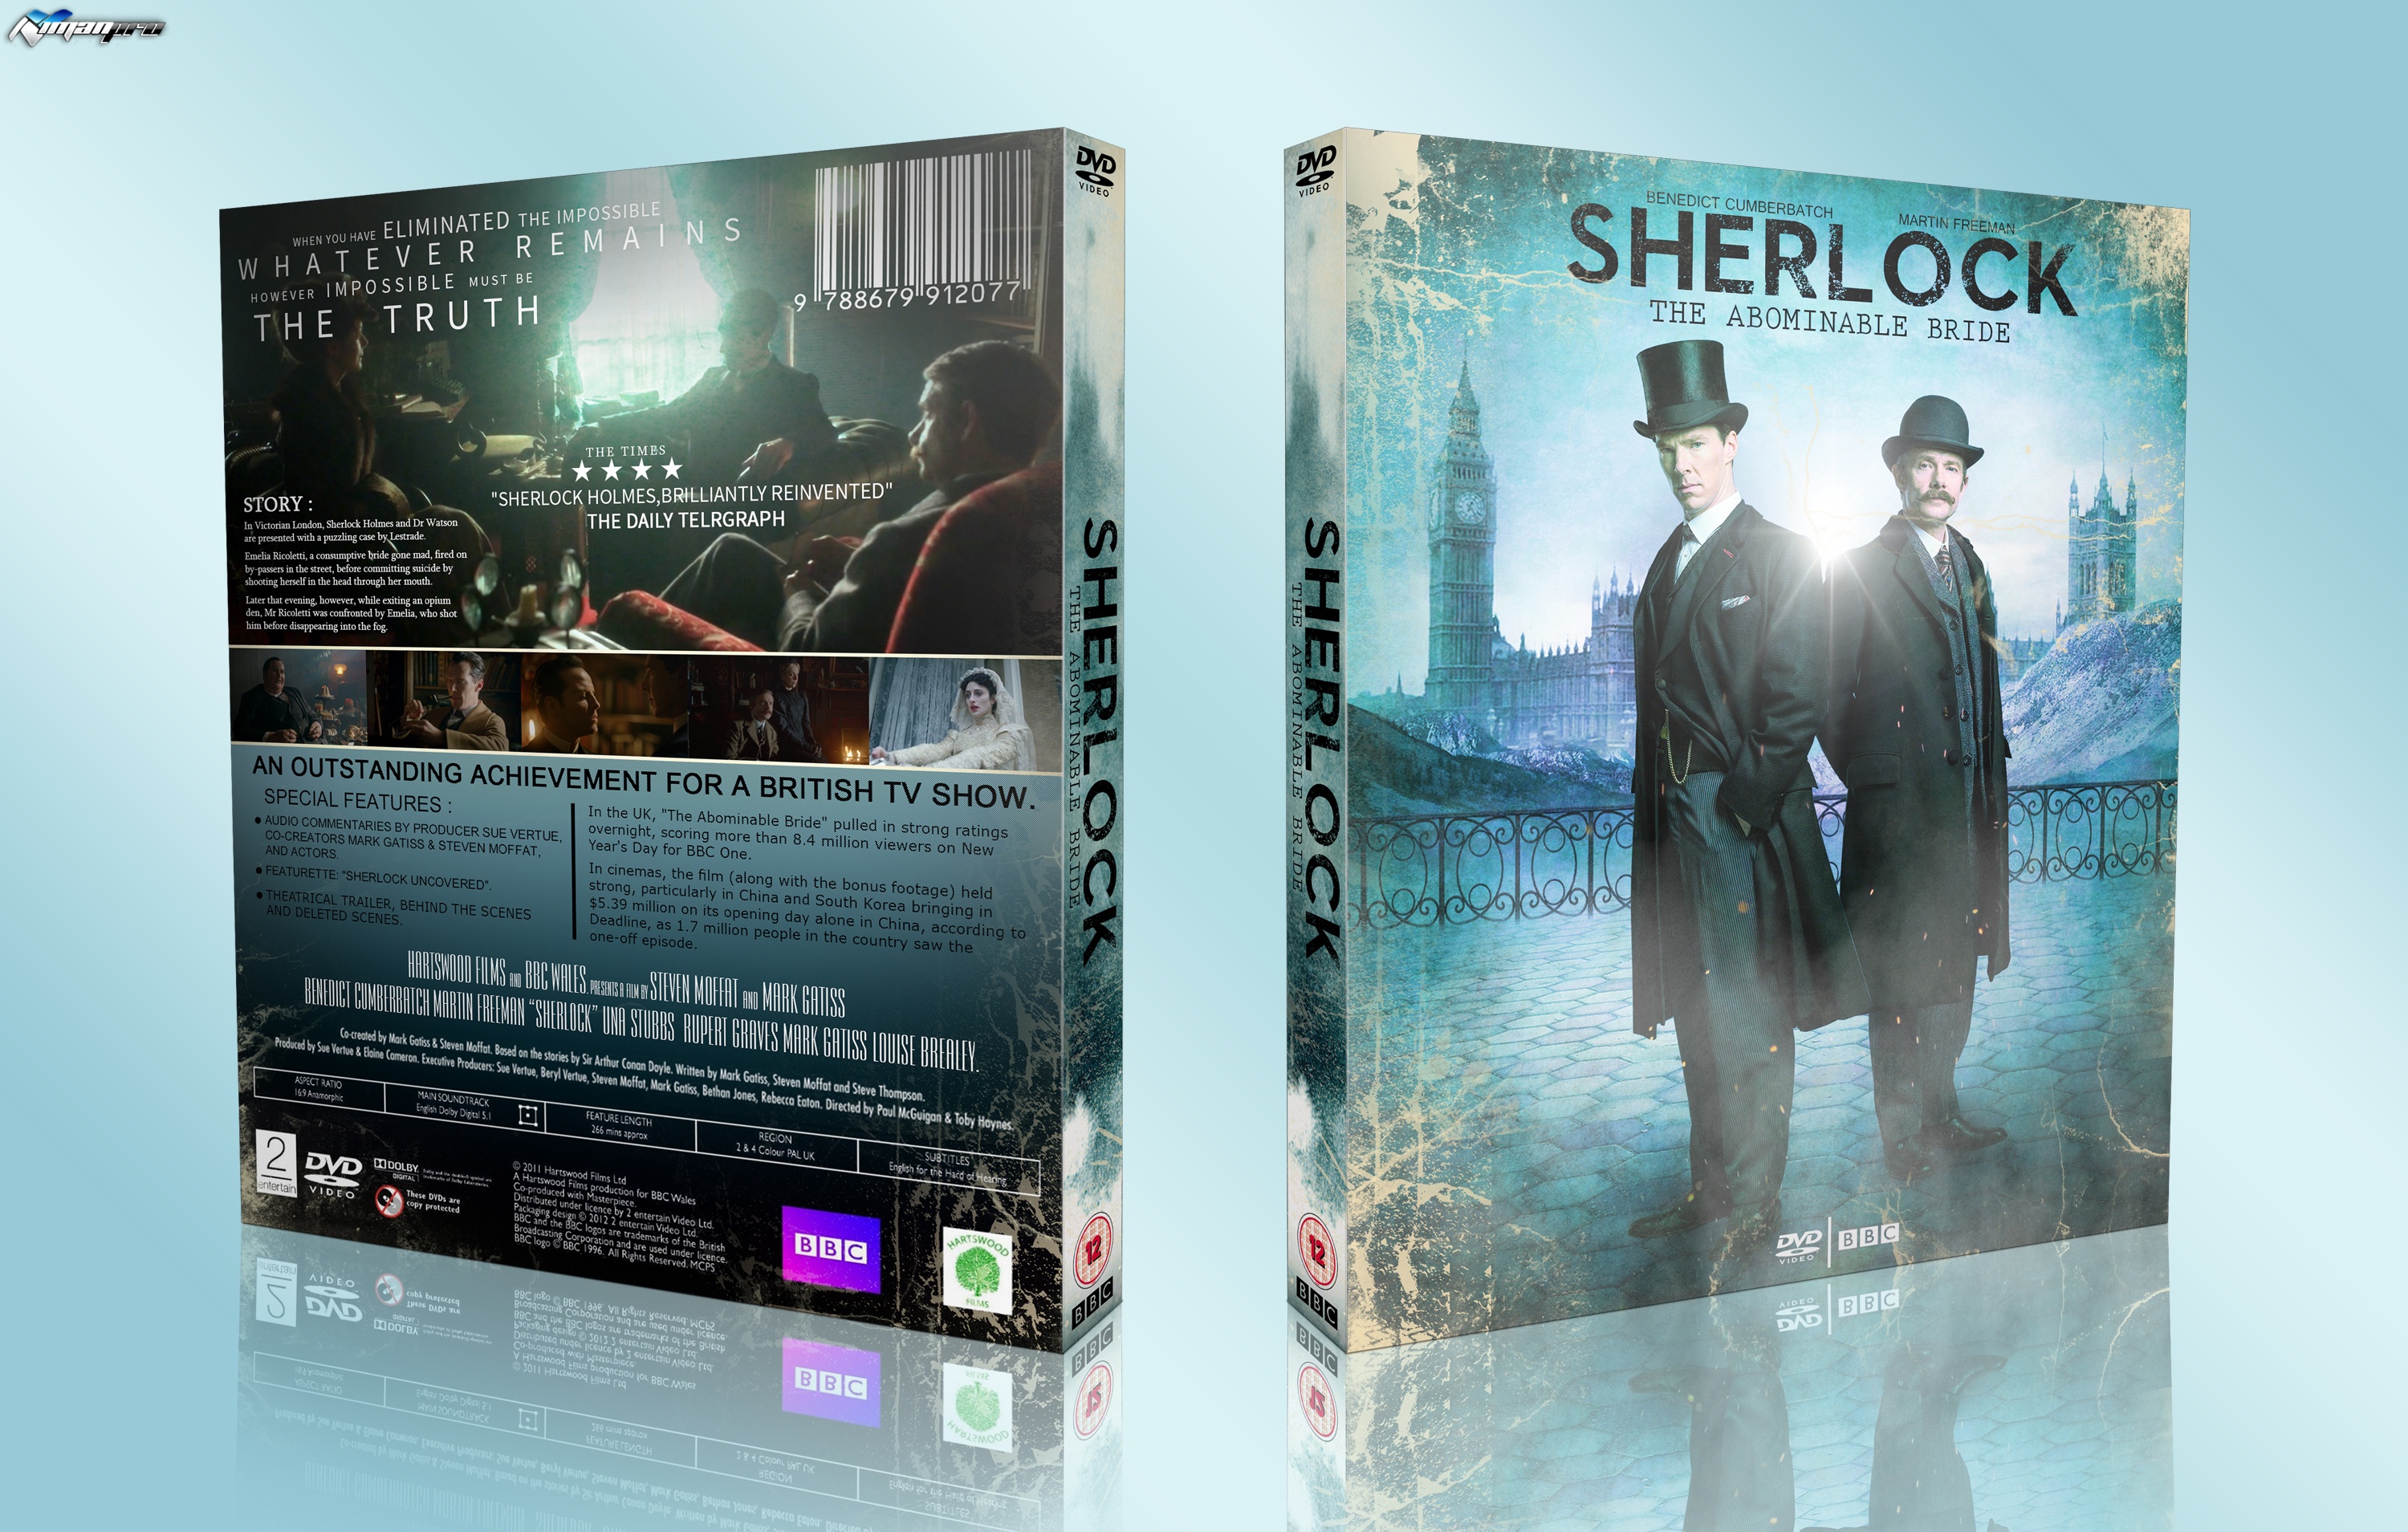 Sherlock The Abominable Bride box cover